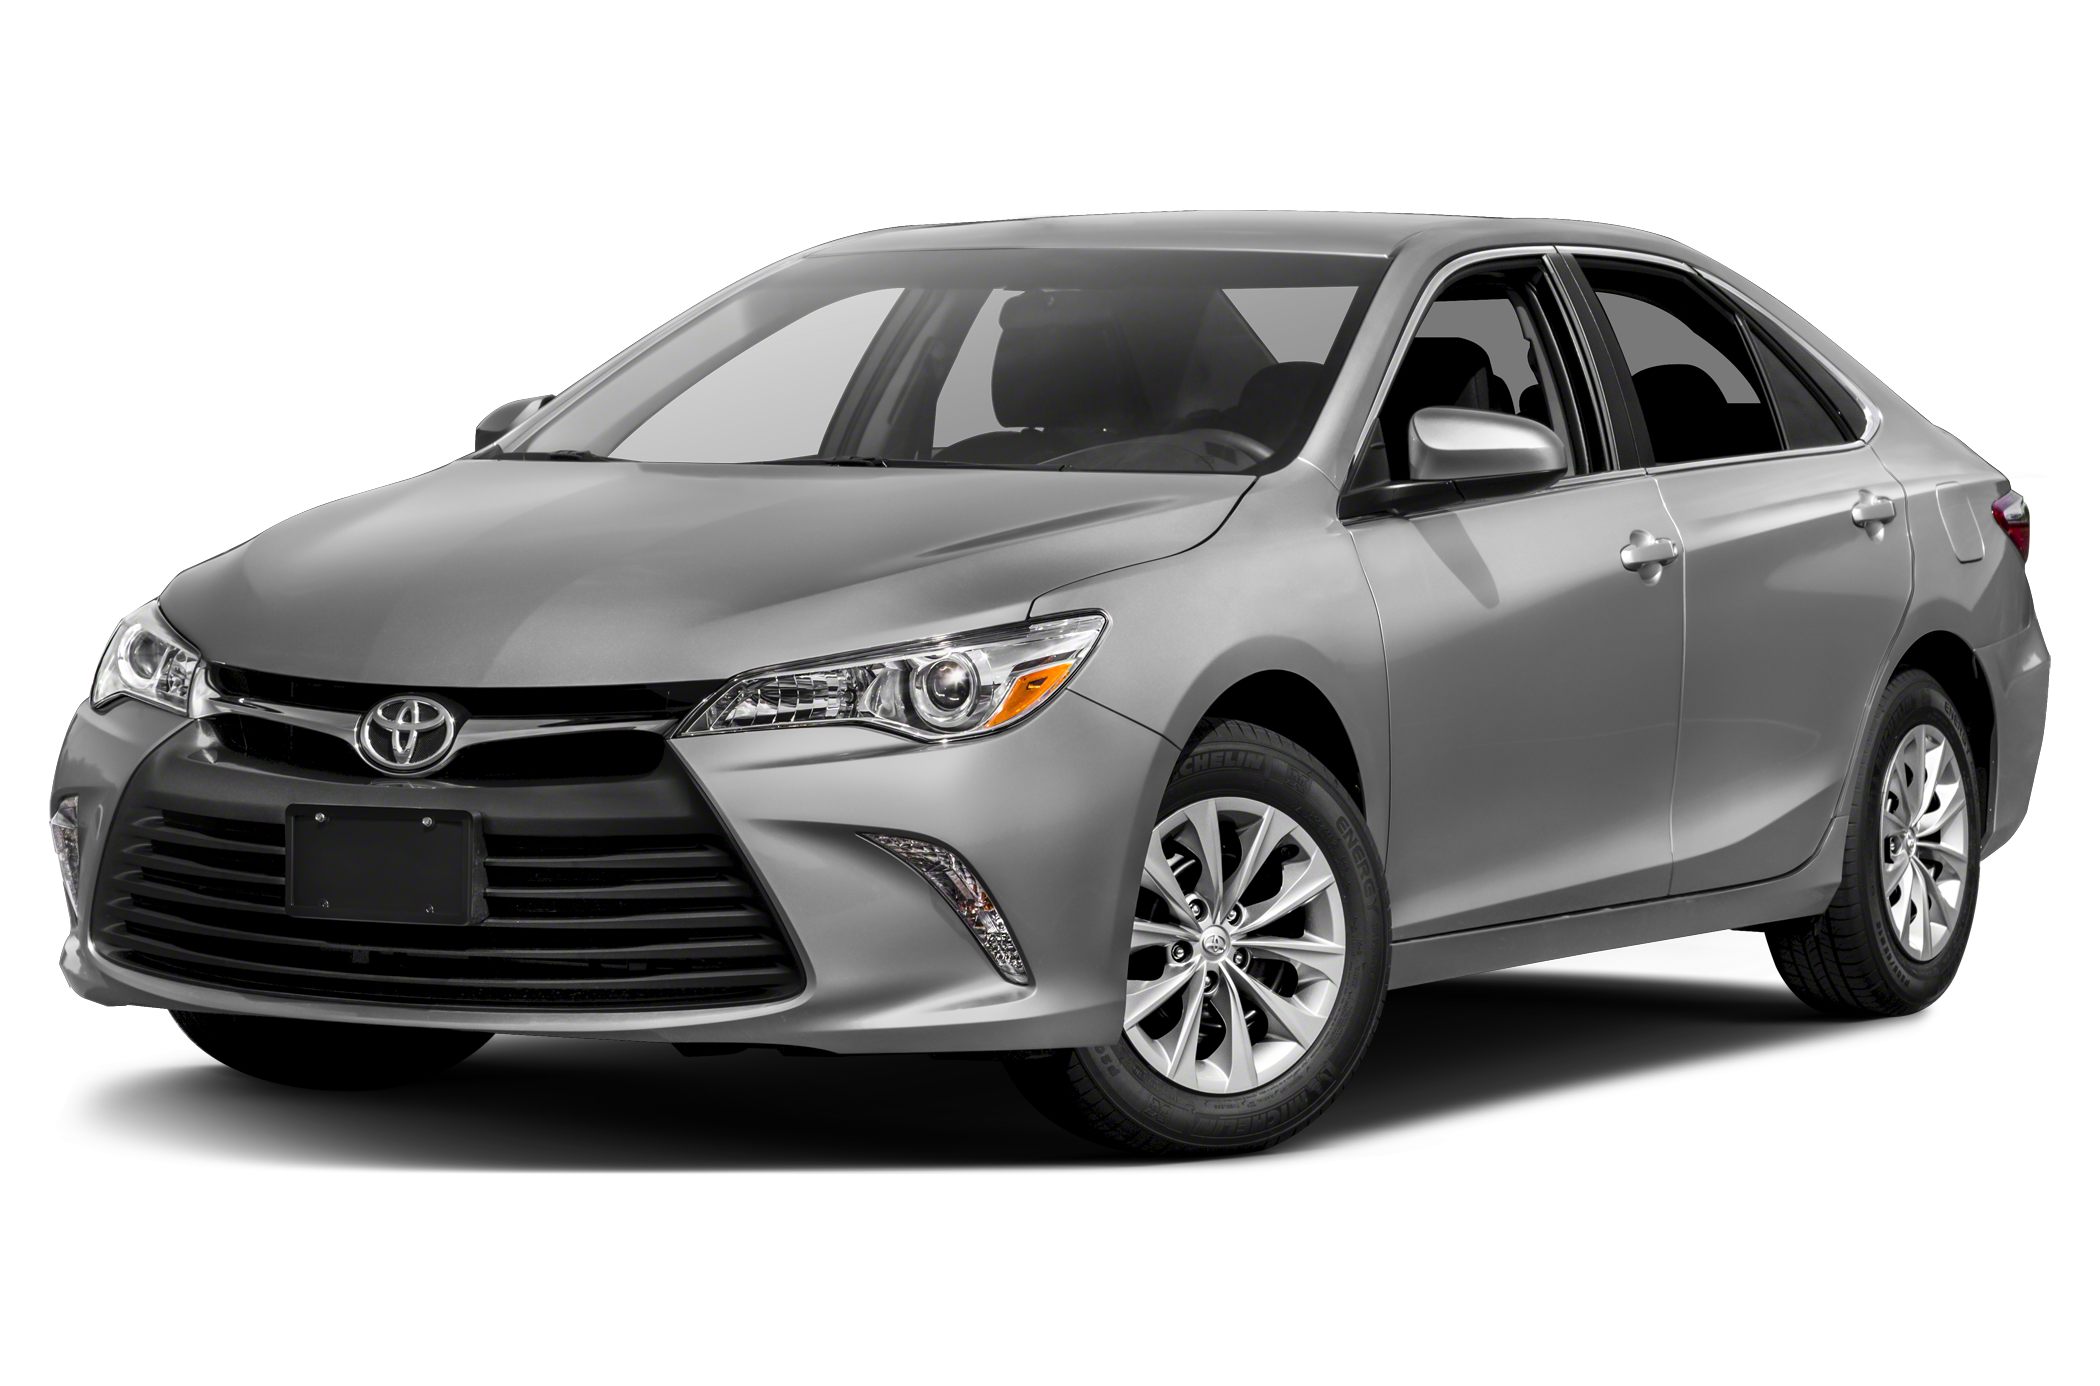 2017 Toyota Camry Le 4dr Sedan Safety Features